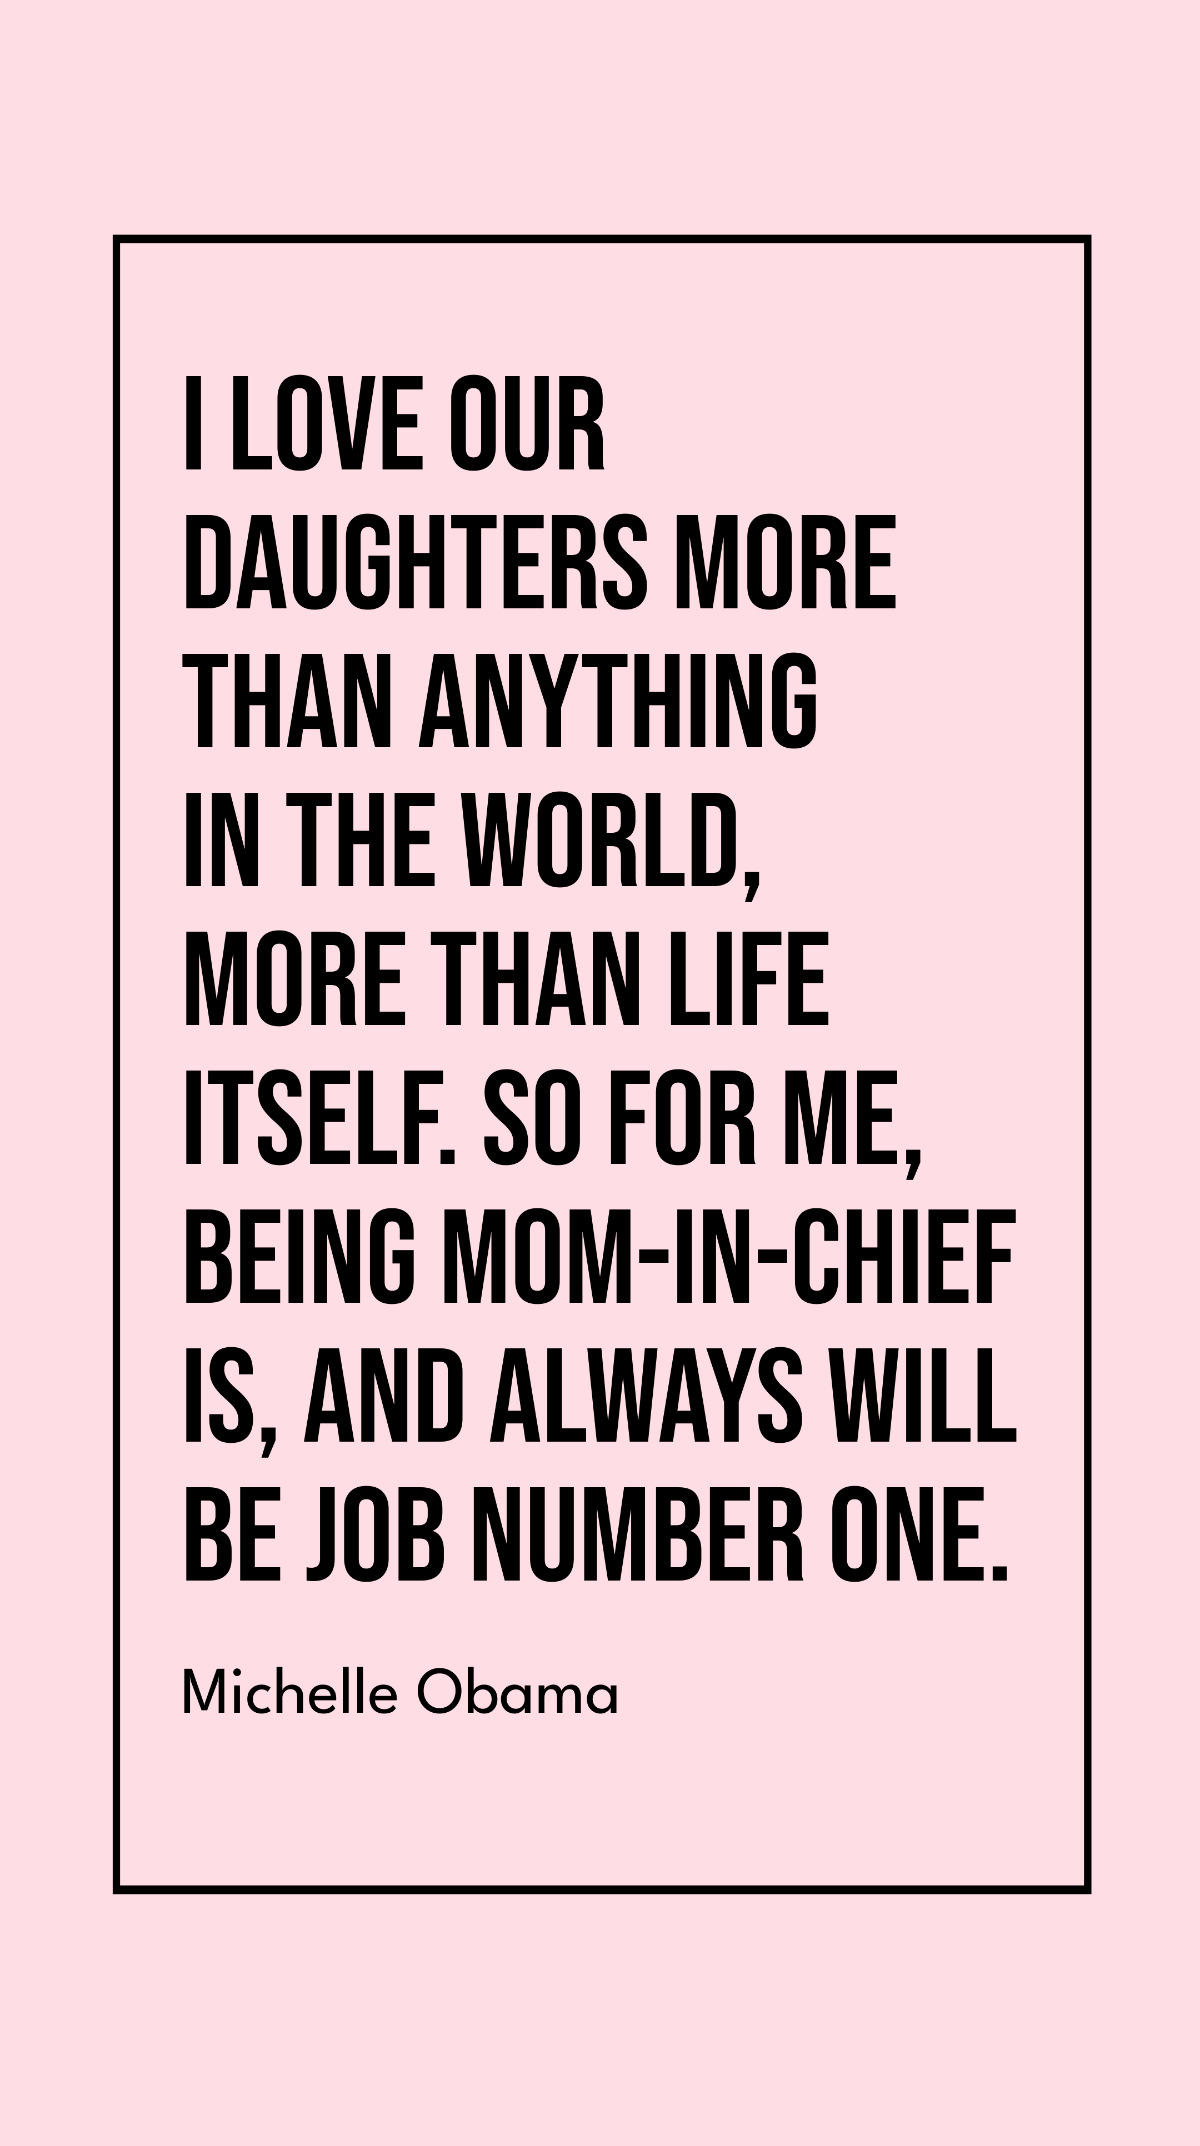 Michelle Obama - I love our daughters more than anything in the world, more than life itself. So for me, being Mom-in-Chief is, and always will be job number one.